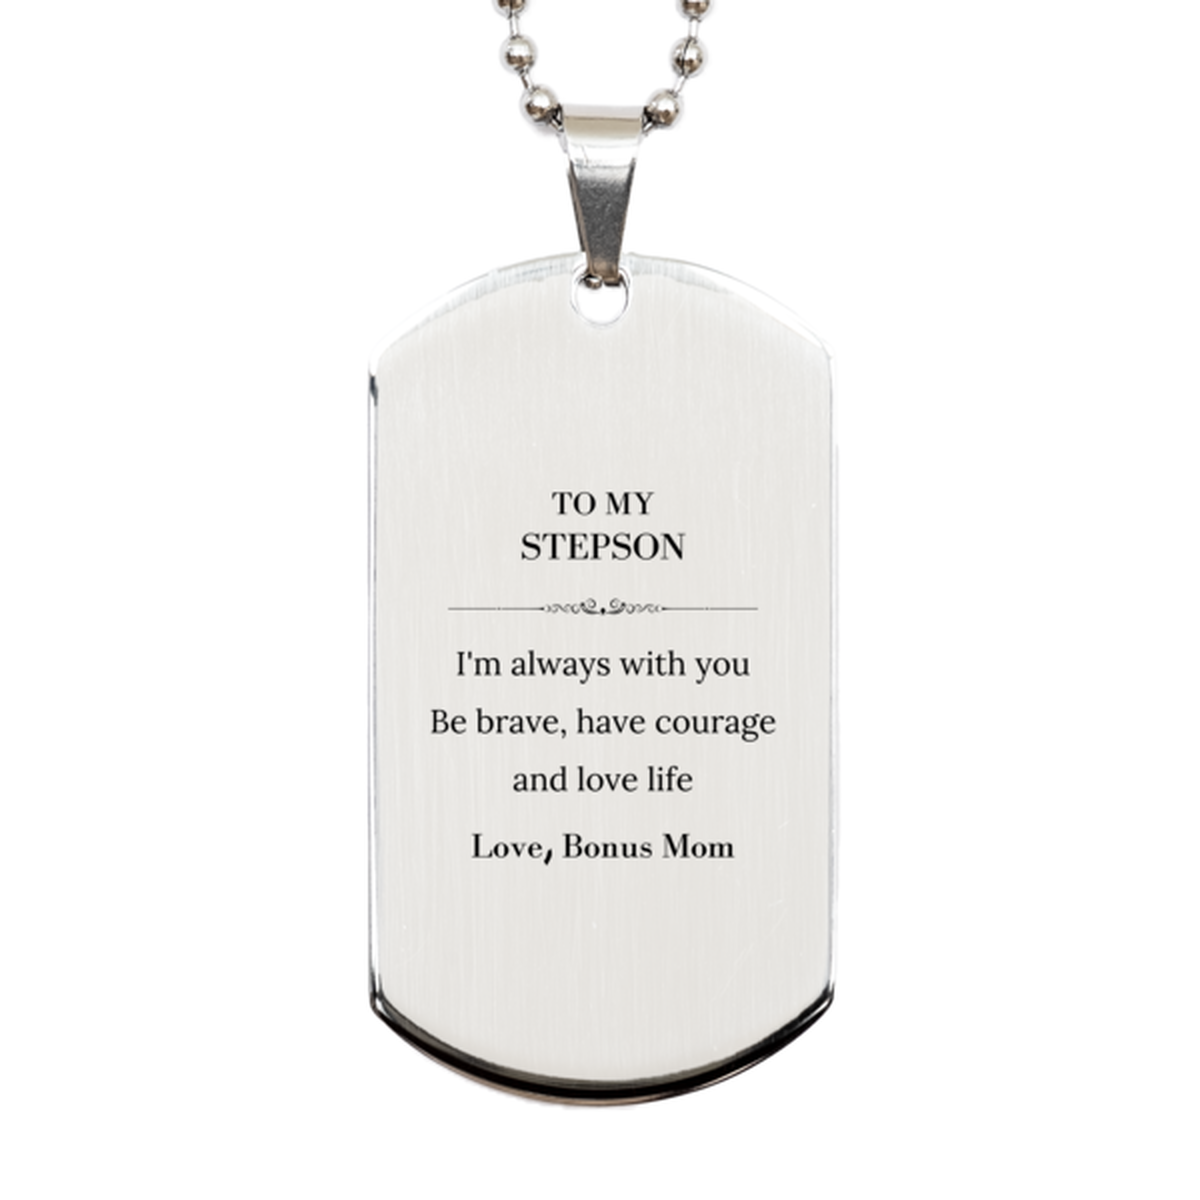 To My Stepson Gifts from Bonus Mom, Unique Silver Dog Tag Inspirational Christmas Birthday Graduation Gifts for Stepson I'm always with you. Be brave, have courage and love life. Love, Bonus Mom